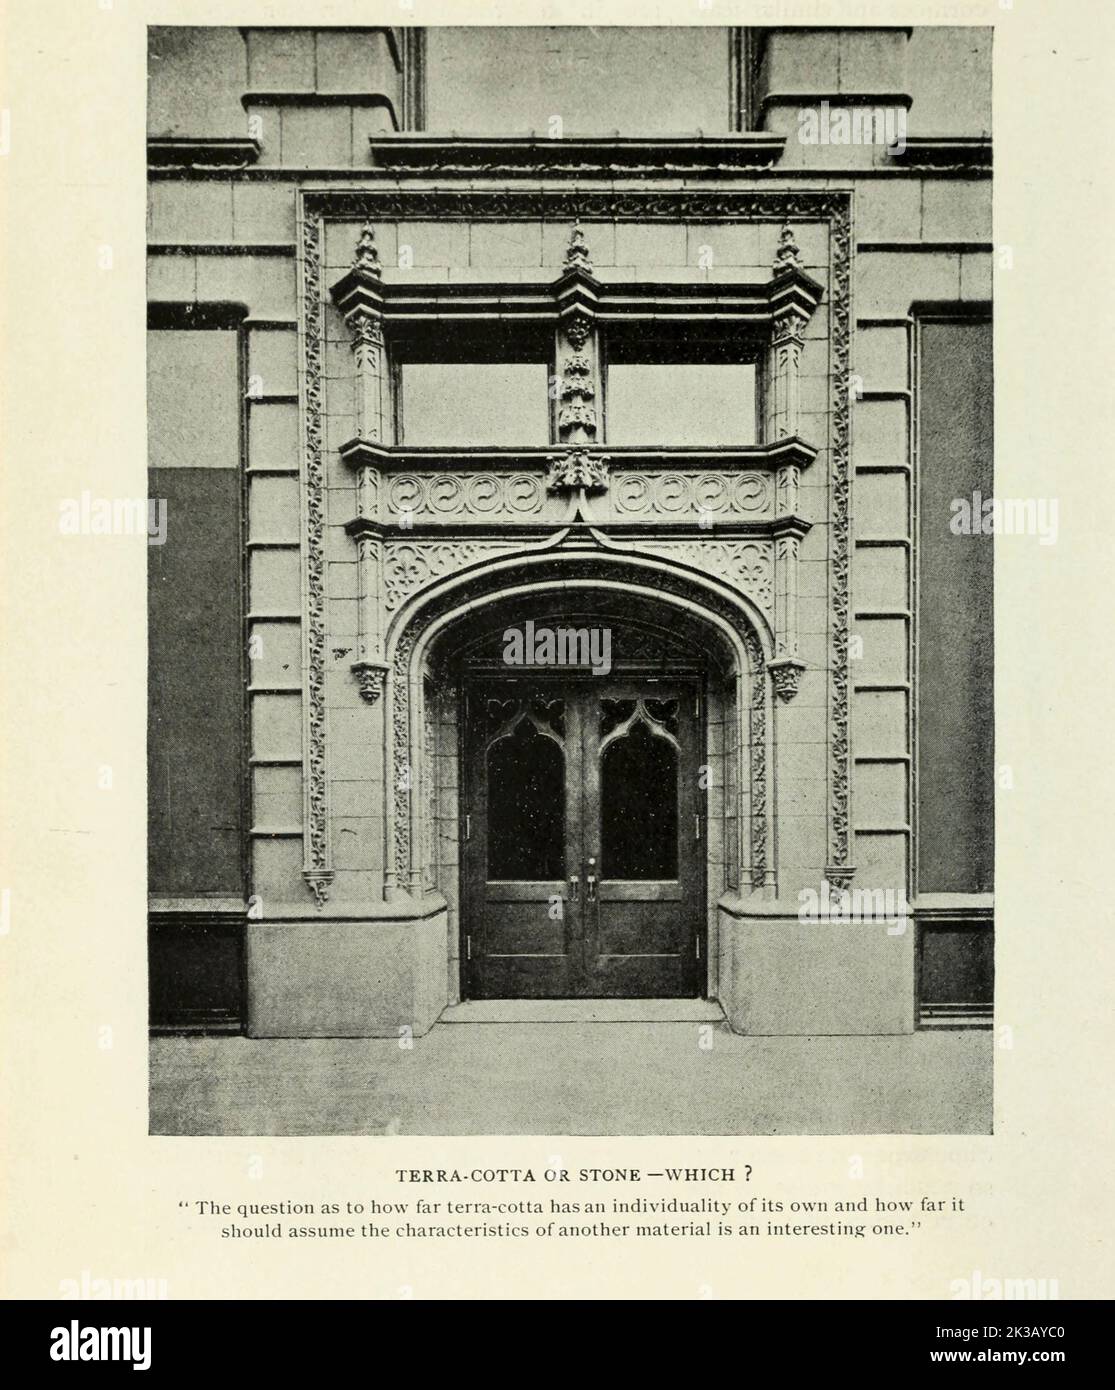 Terra-Cotta or stone Which? from the Article THE USE OF TERRA-COTTA IN MODERN BUILDINGS. By George M. R. Twose.  from The Engineering Magazine DEVOTED TO INDUSTRIAL PROGRESS Volume VIII April to September, 1895 NEW YORK The Engineering Magazine Co Stock Photo